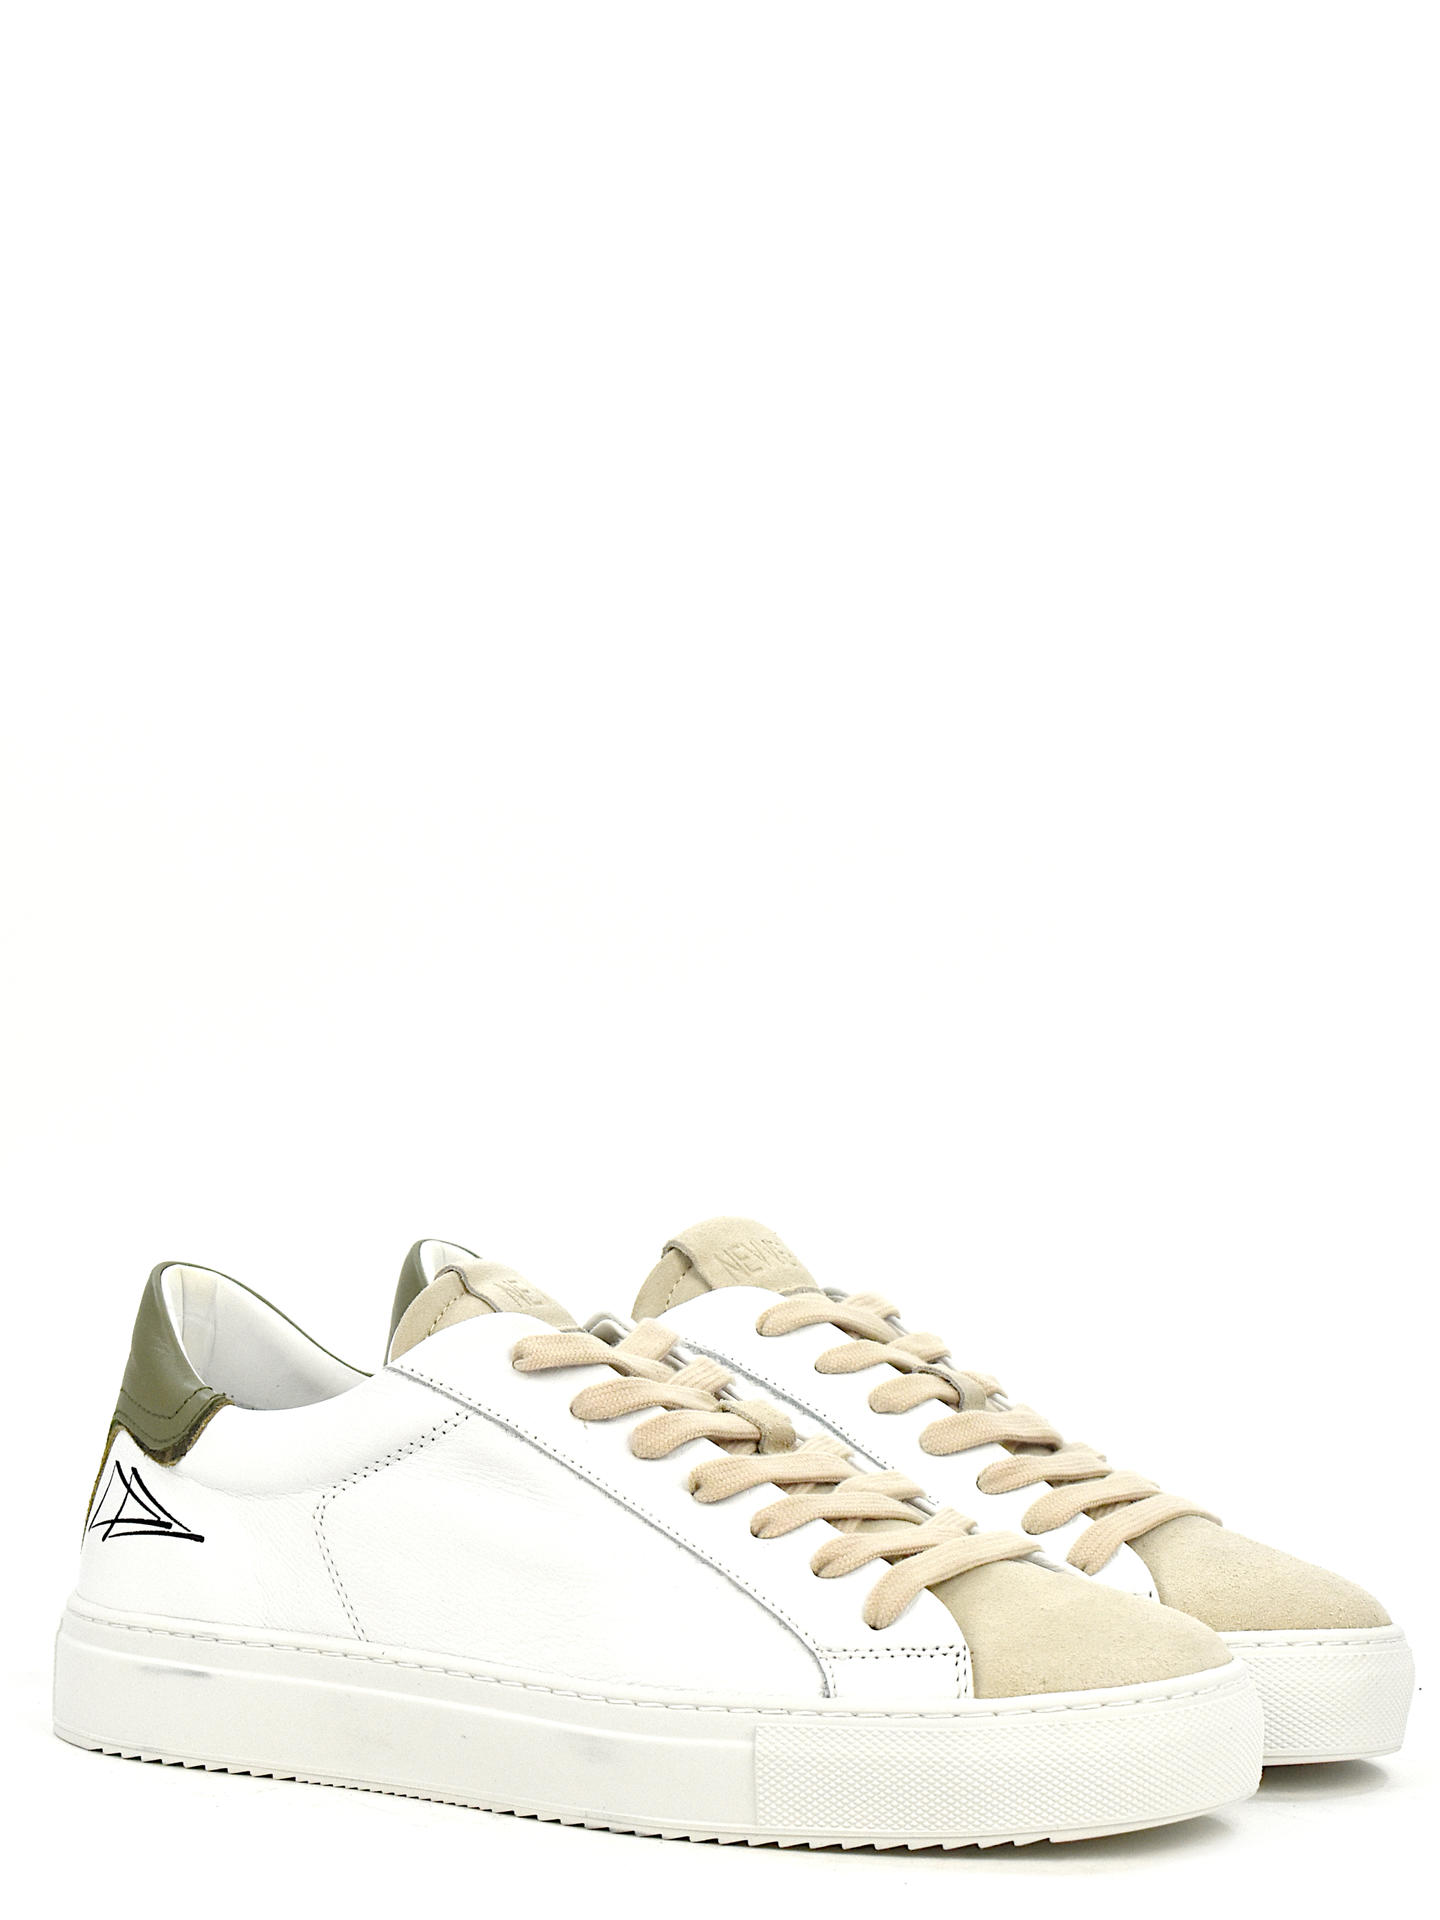 SNEAKERS NEVVER MADEIRA BIANCO/BEIGE